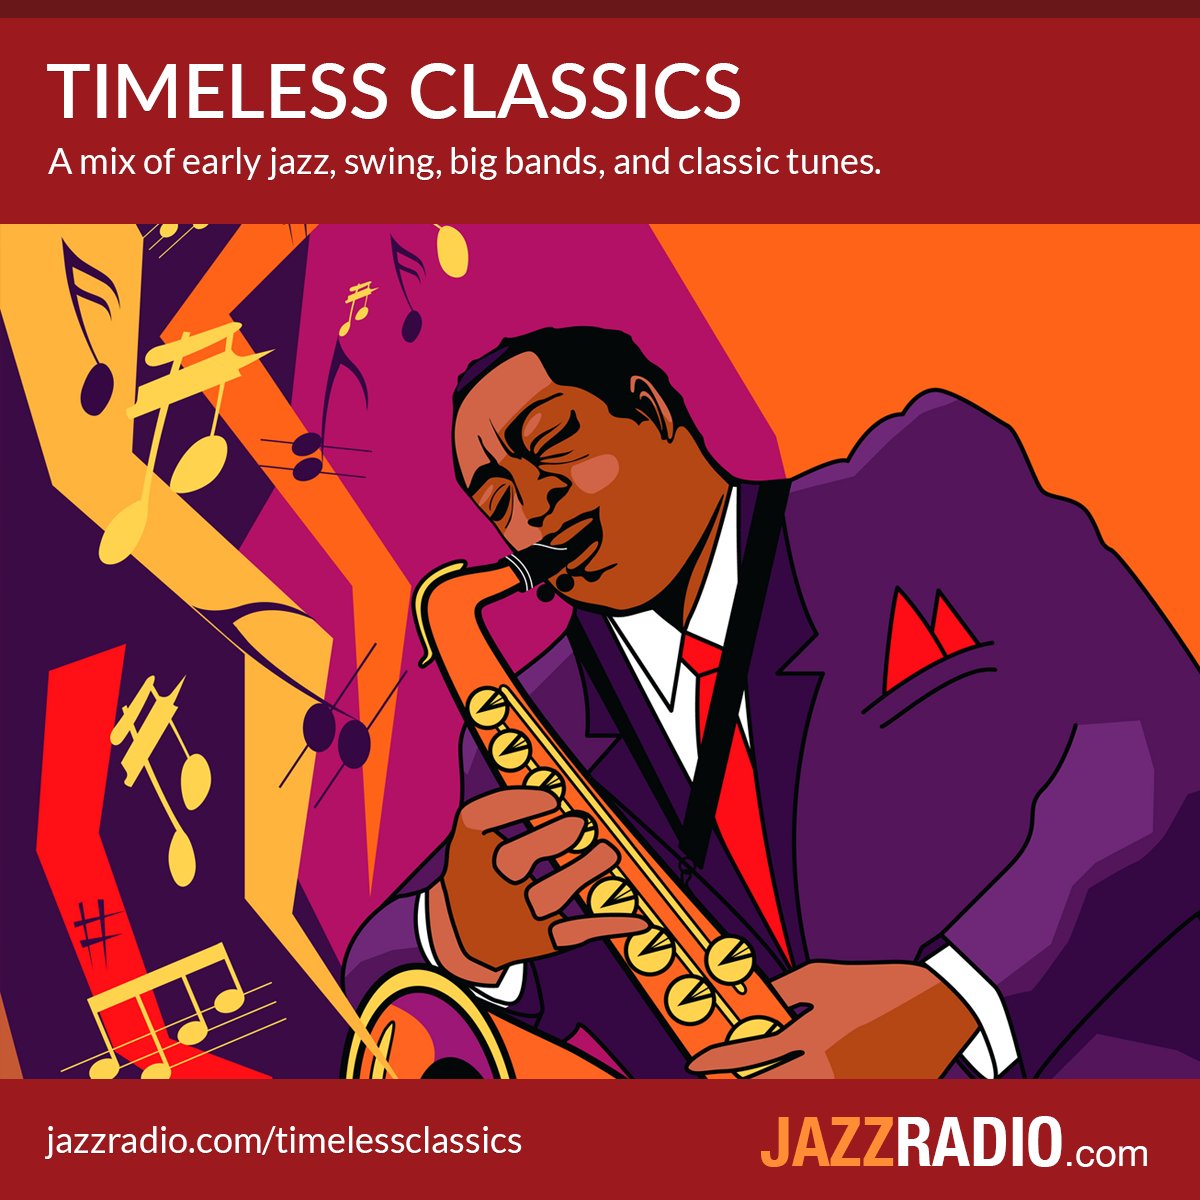 Thirty elect capsule JAZZRADIO.com on Twitter: "Let the legends of jazz keep you company this  weekend! 'Timeless Classics' features a mix of early jazz, swing, big  bands, and classic tunes. All of your familiar favorites